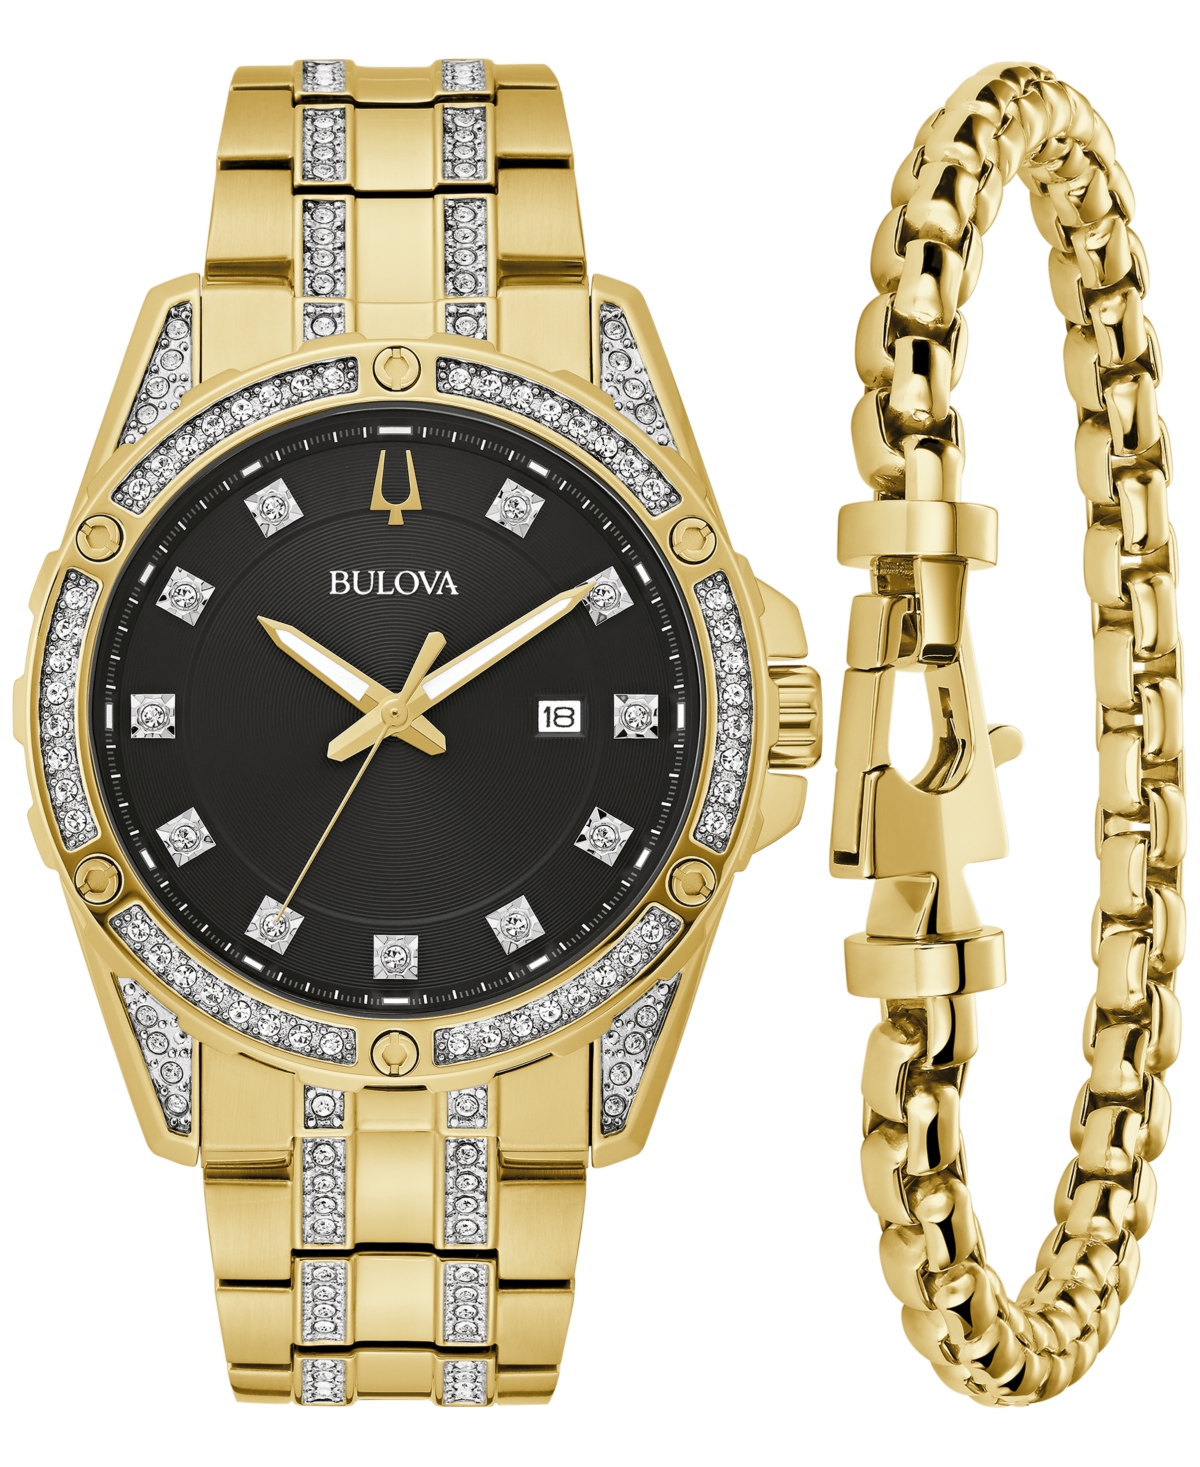 Bulova Men's Classic Crystal Gold-tone Stainless Steel Bracelet Watch Box Set 43mm In Two Tone